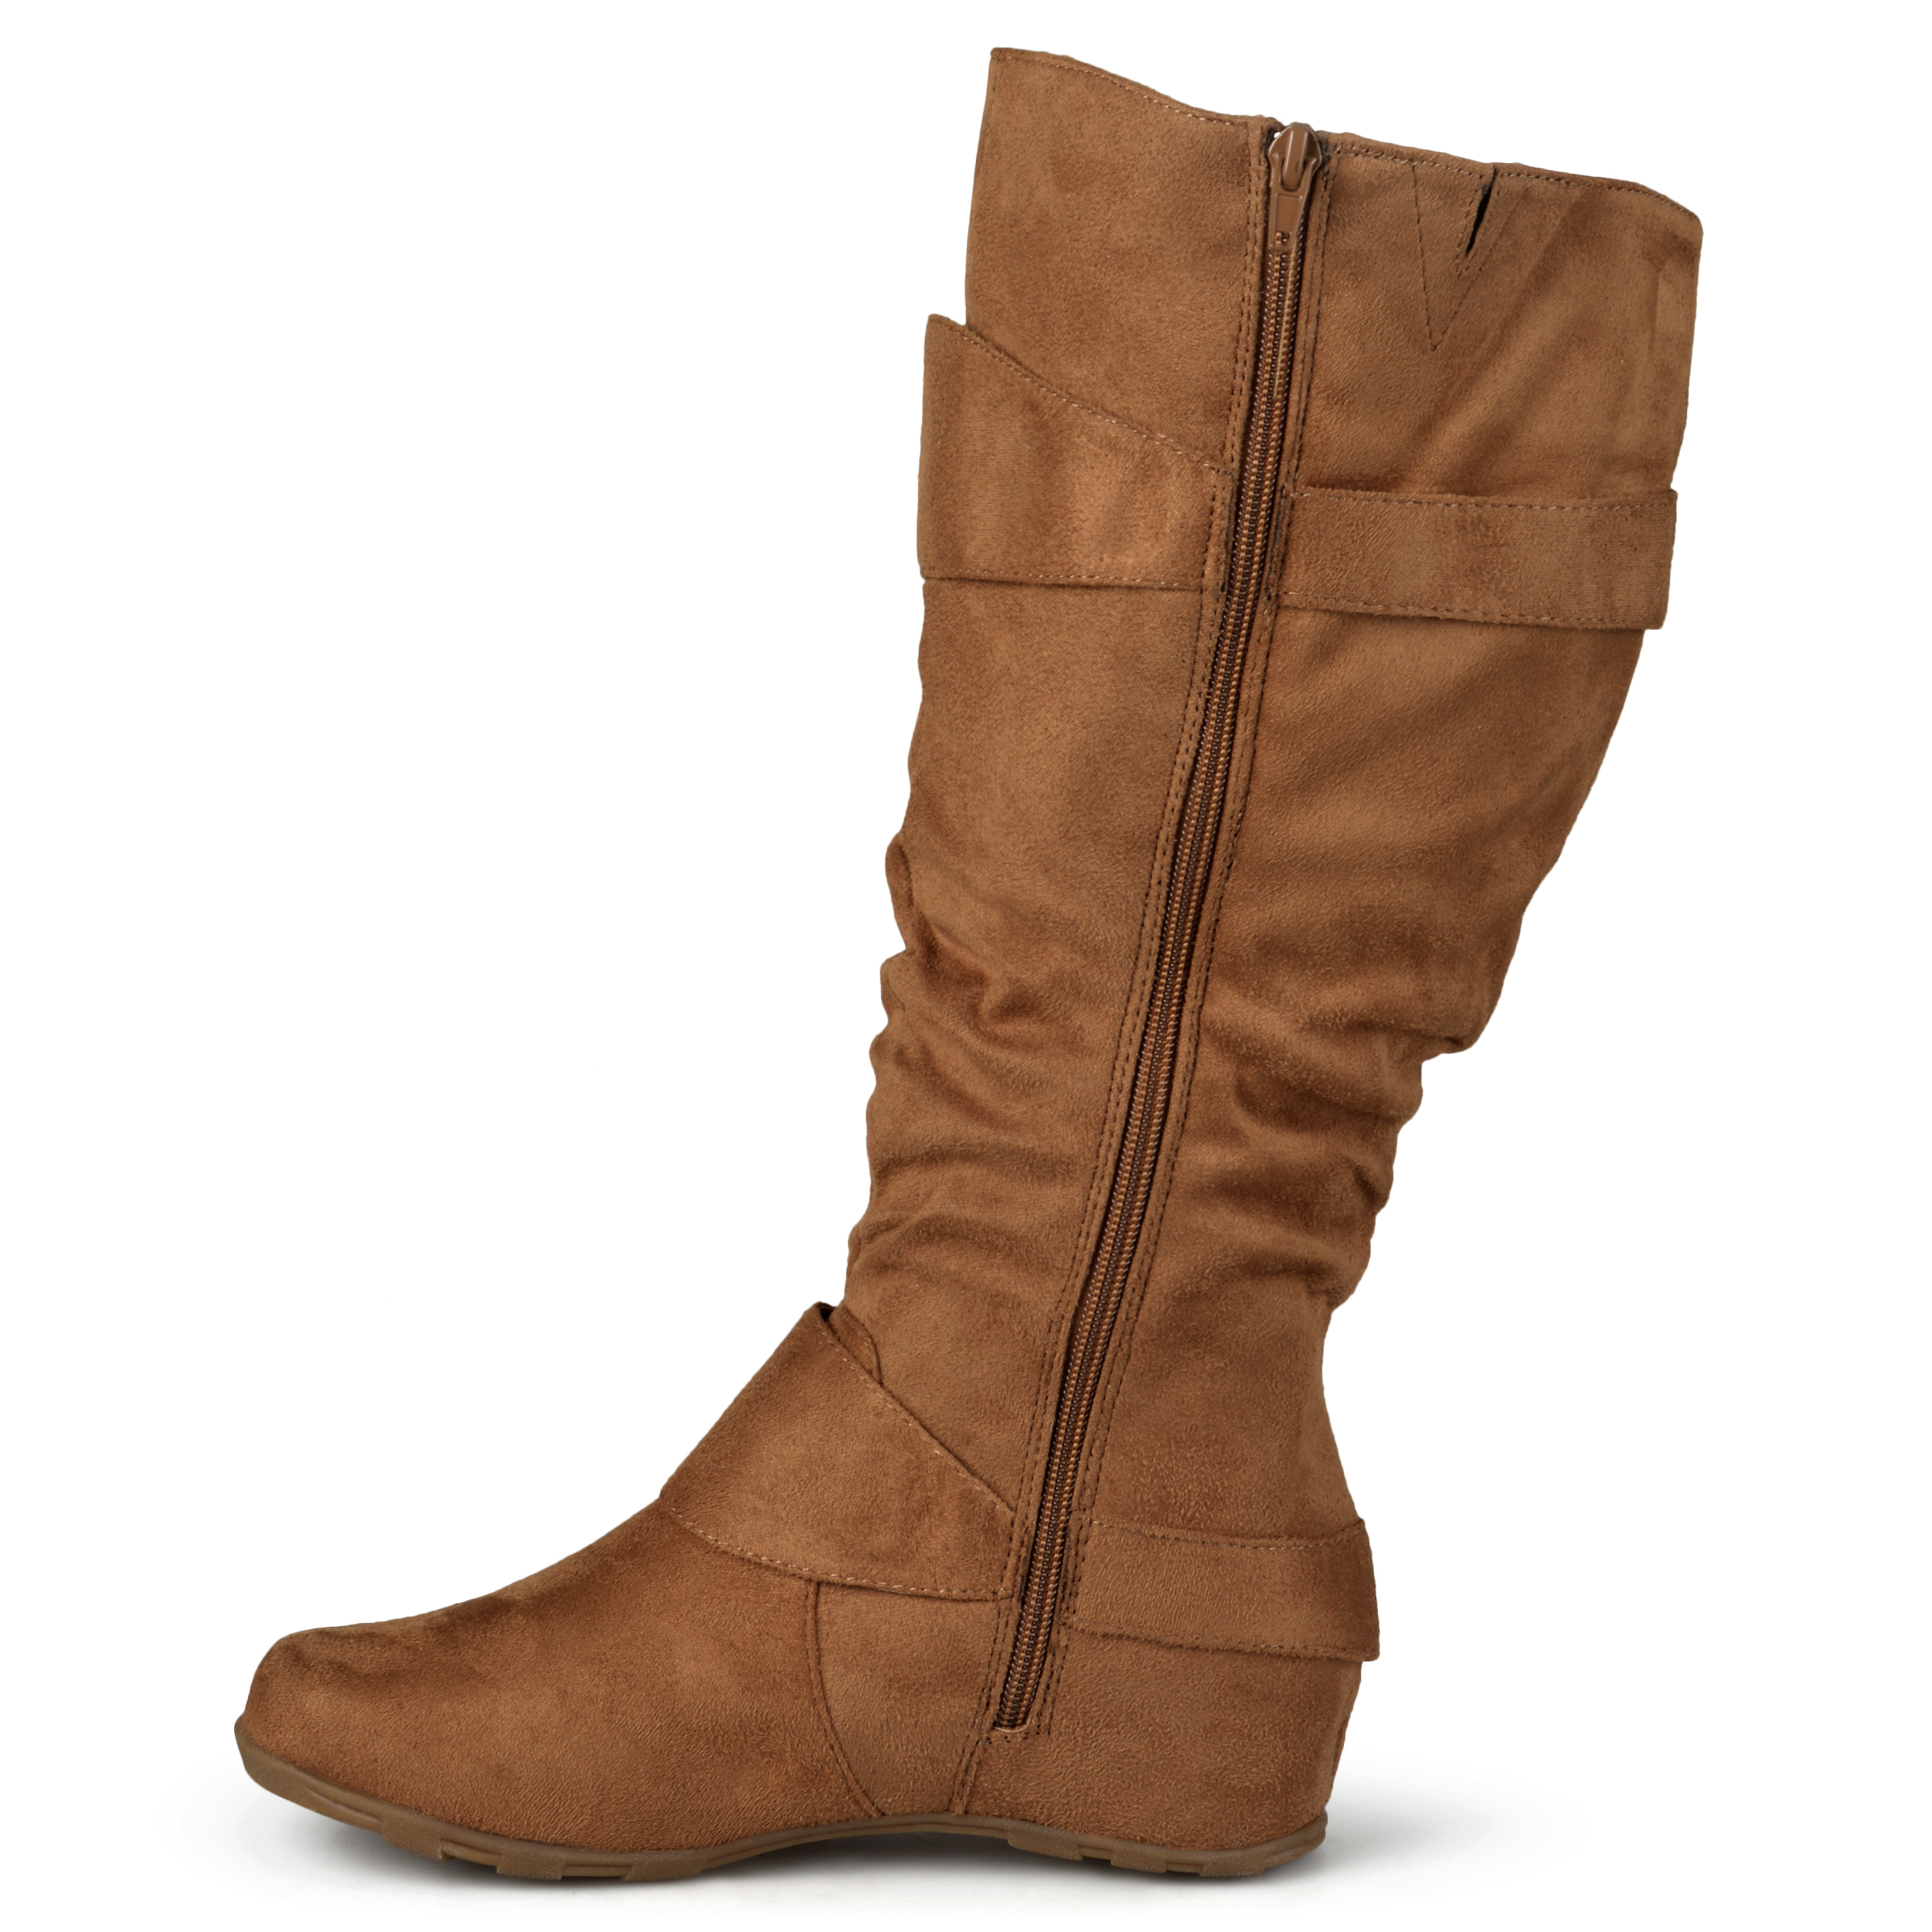 Women's Wide-Calf Buckle Knee-High Slouch Microsuede Boot - image 3 of 8